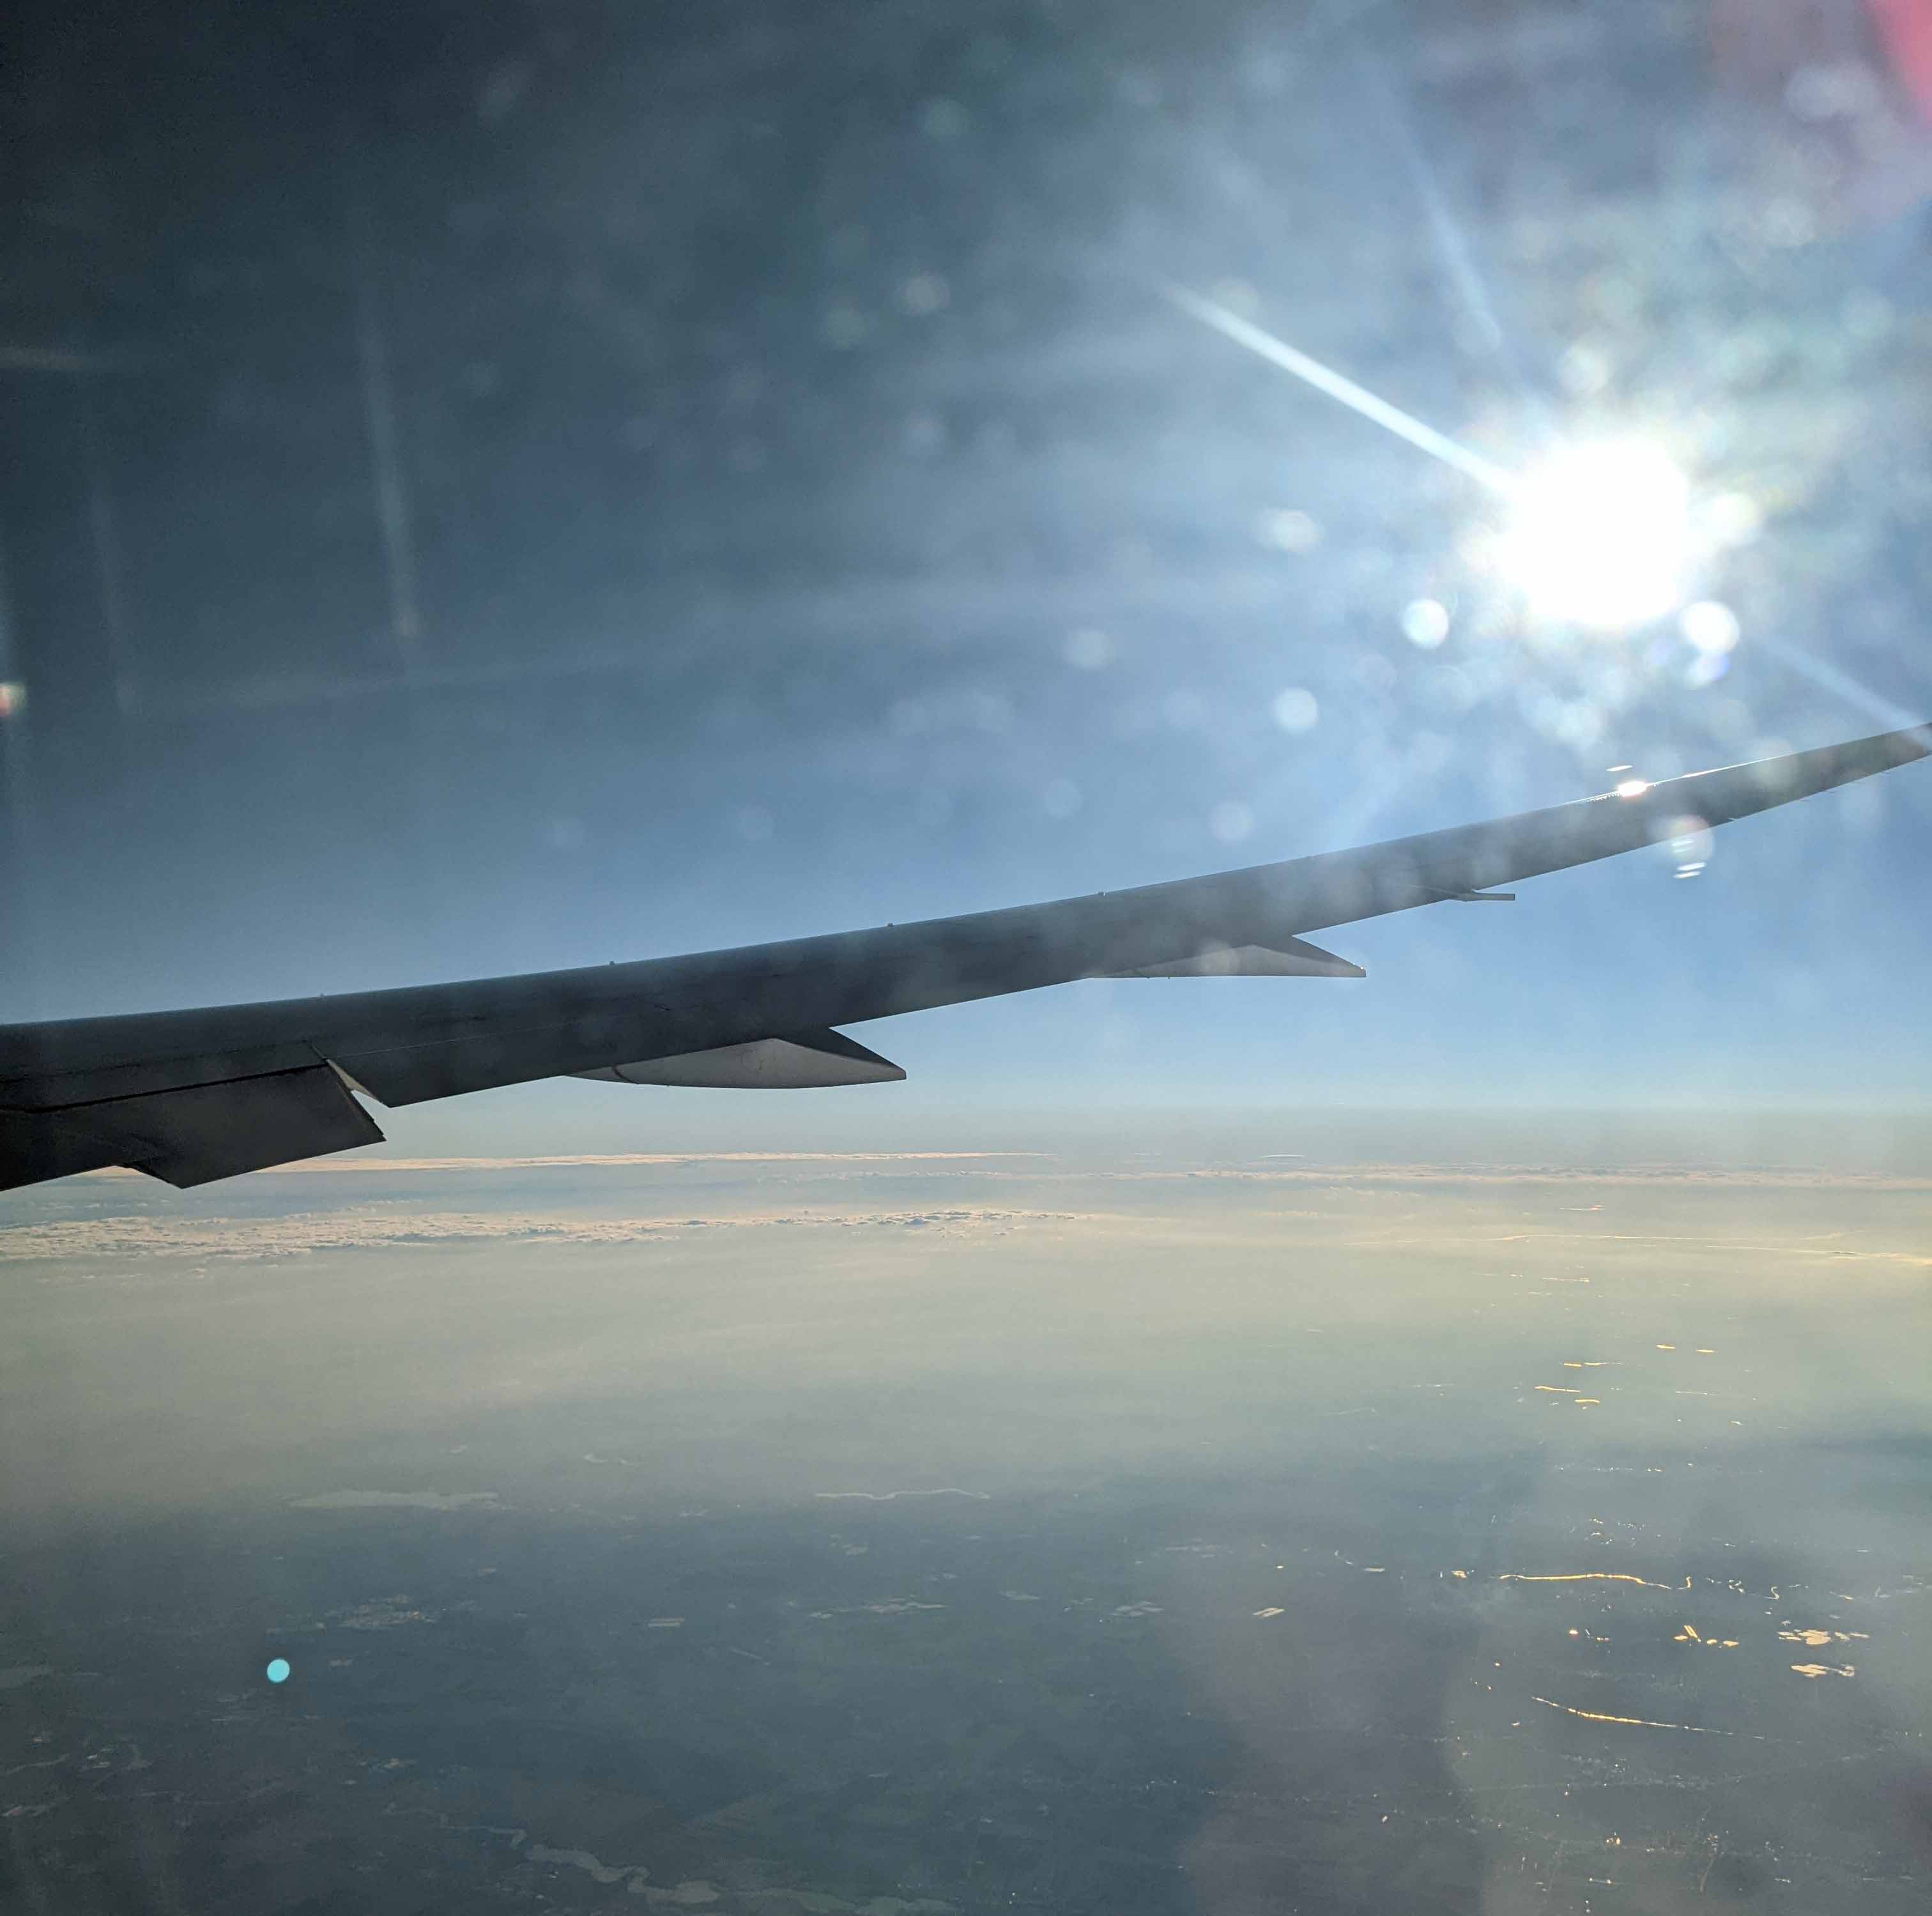 Aerial view over the plane’s wing on a Turkish Airlines flight to Egypt